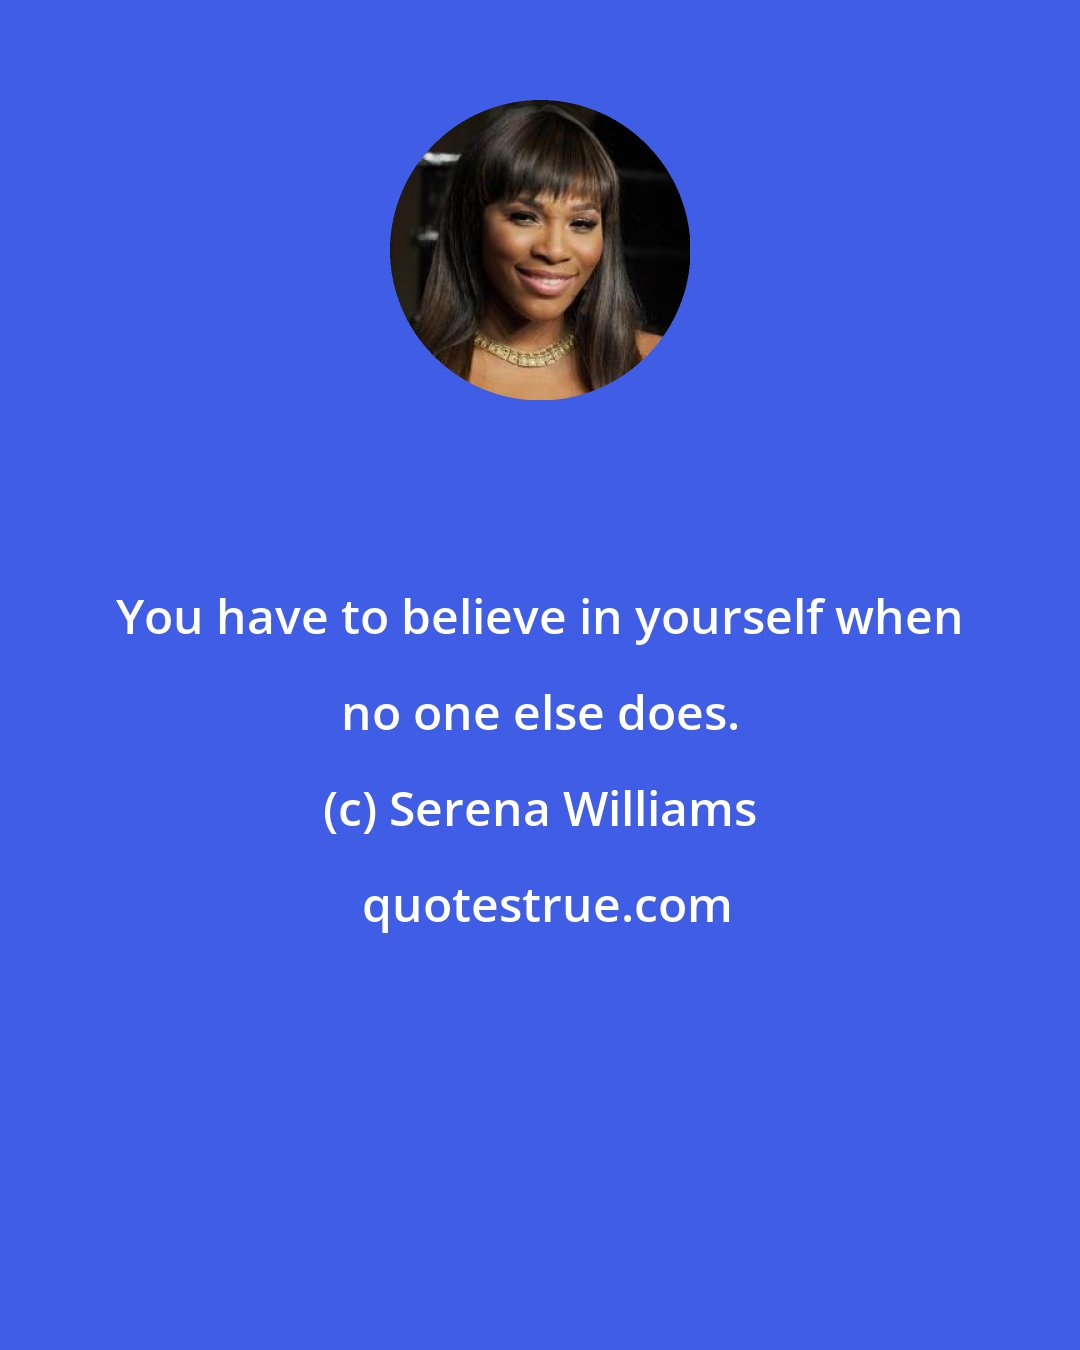 Serena Williams: You have to believe in yourself when no one else does.